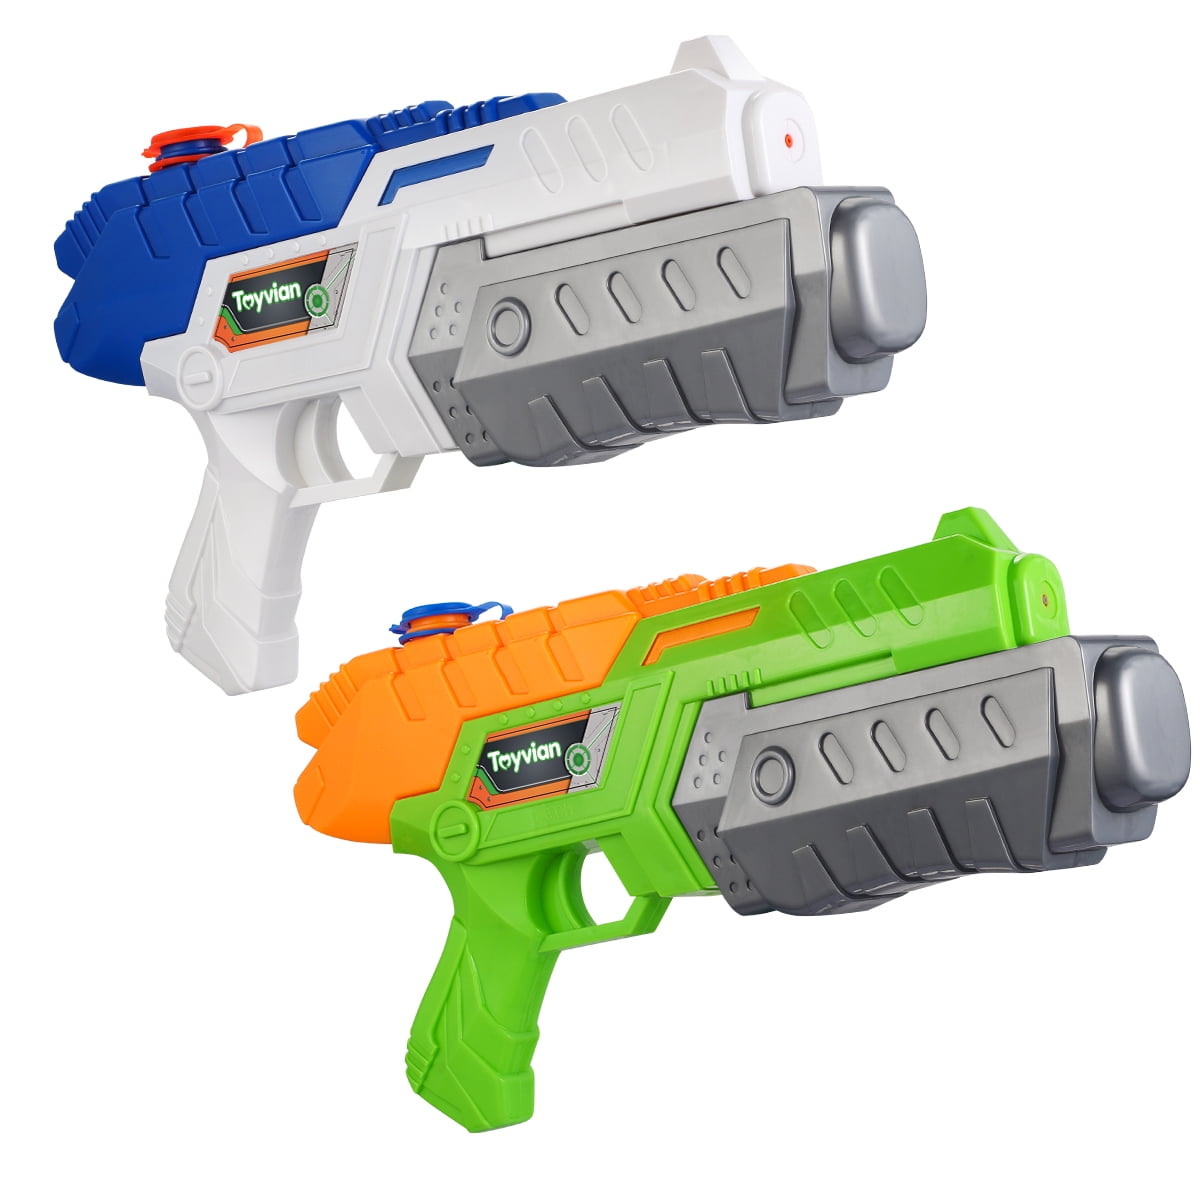 JUMBO OUTER SPACE WATER GUN 17.5 IN squirt guns toys large size super squirter 